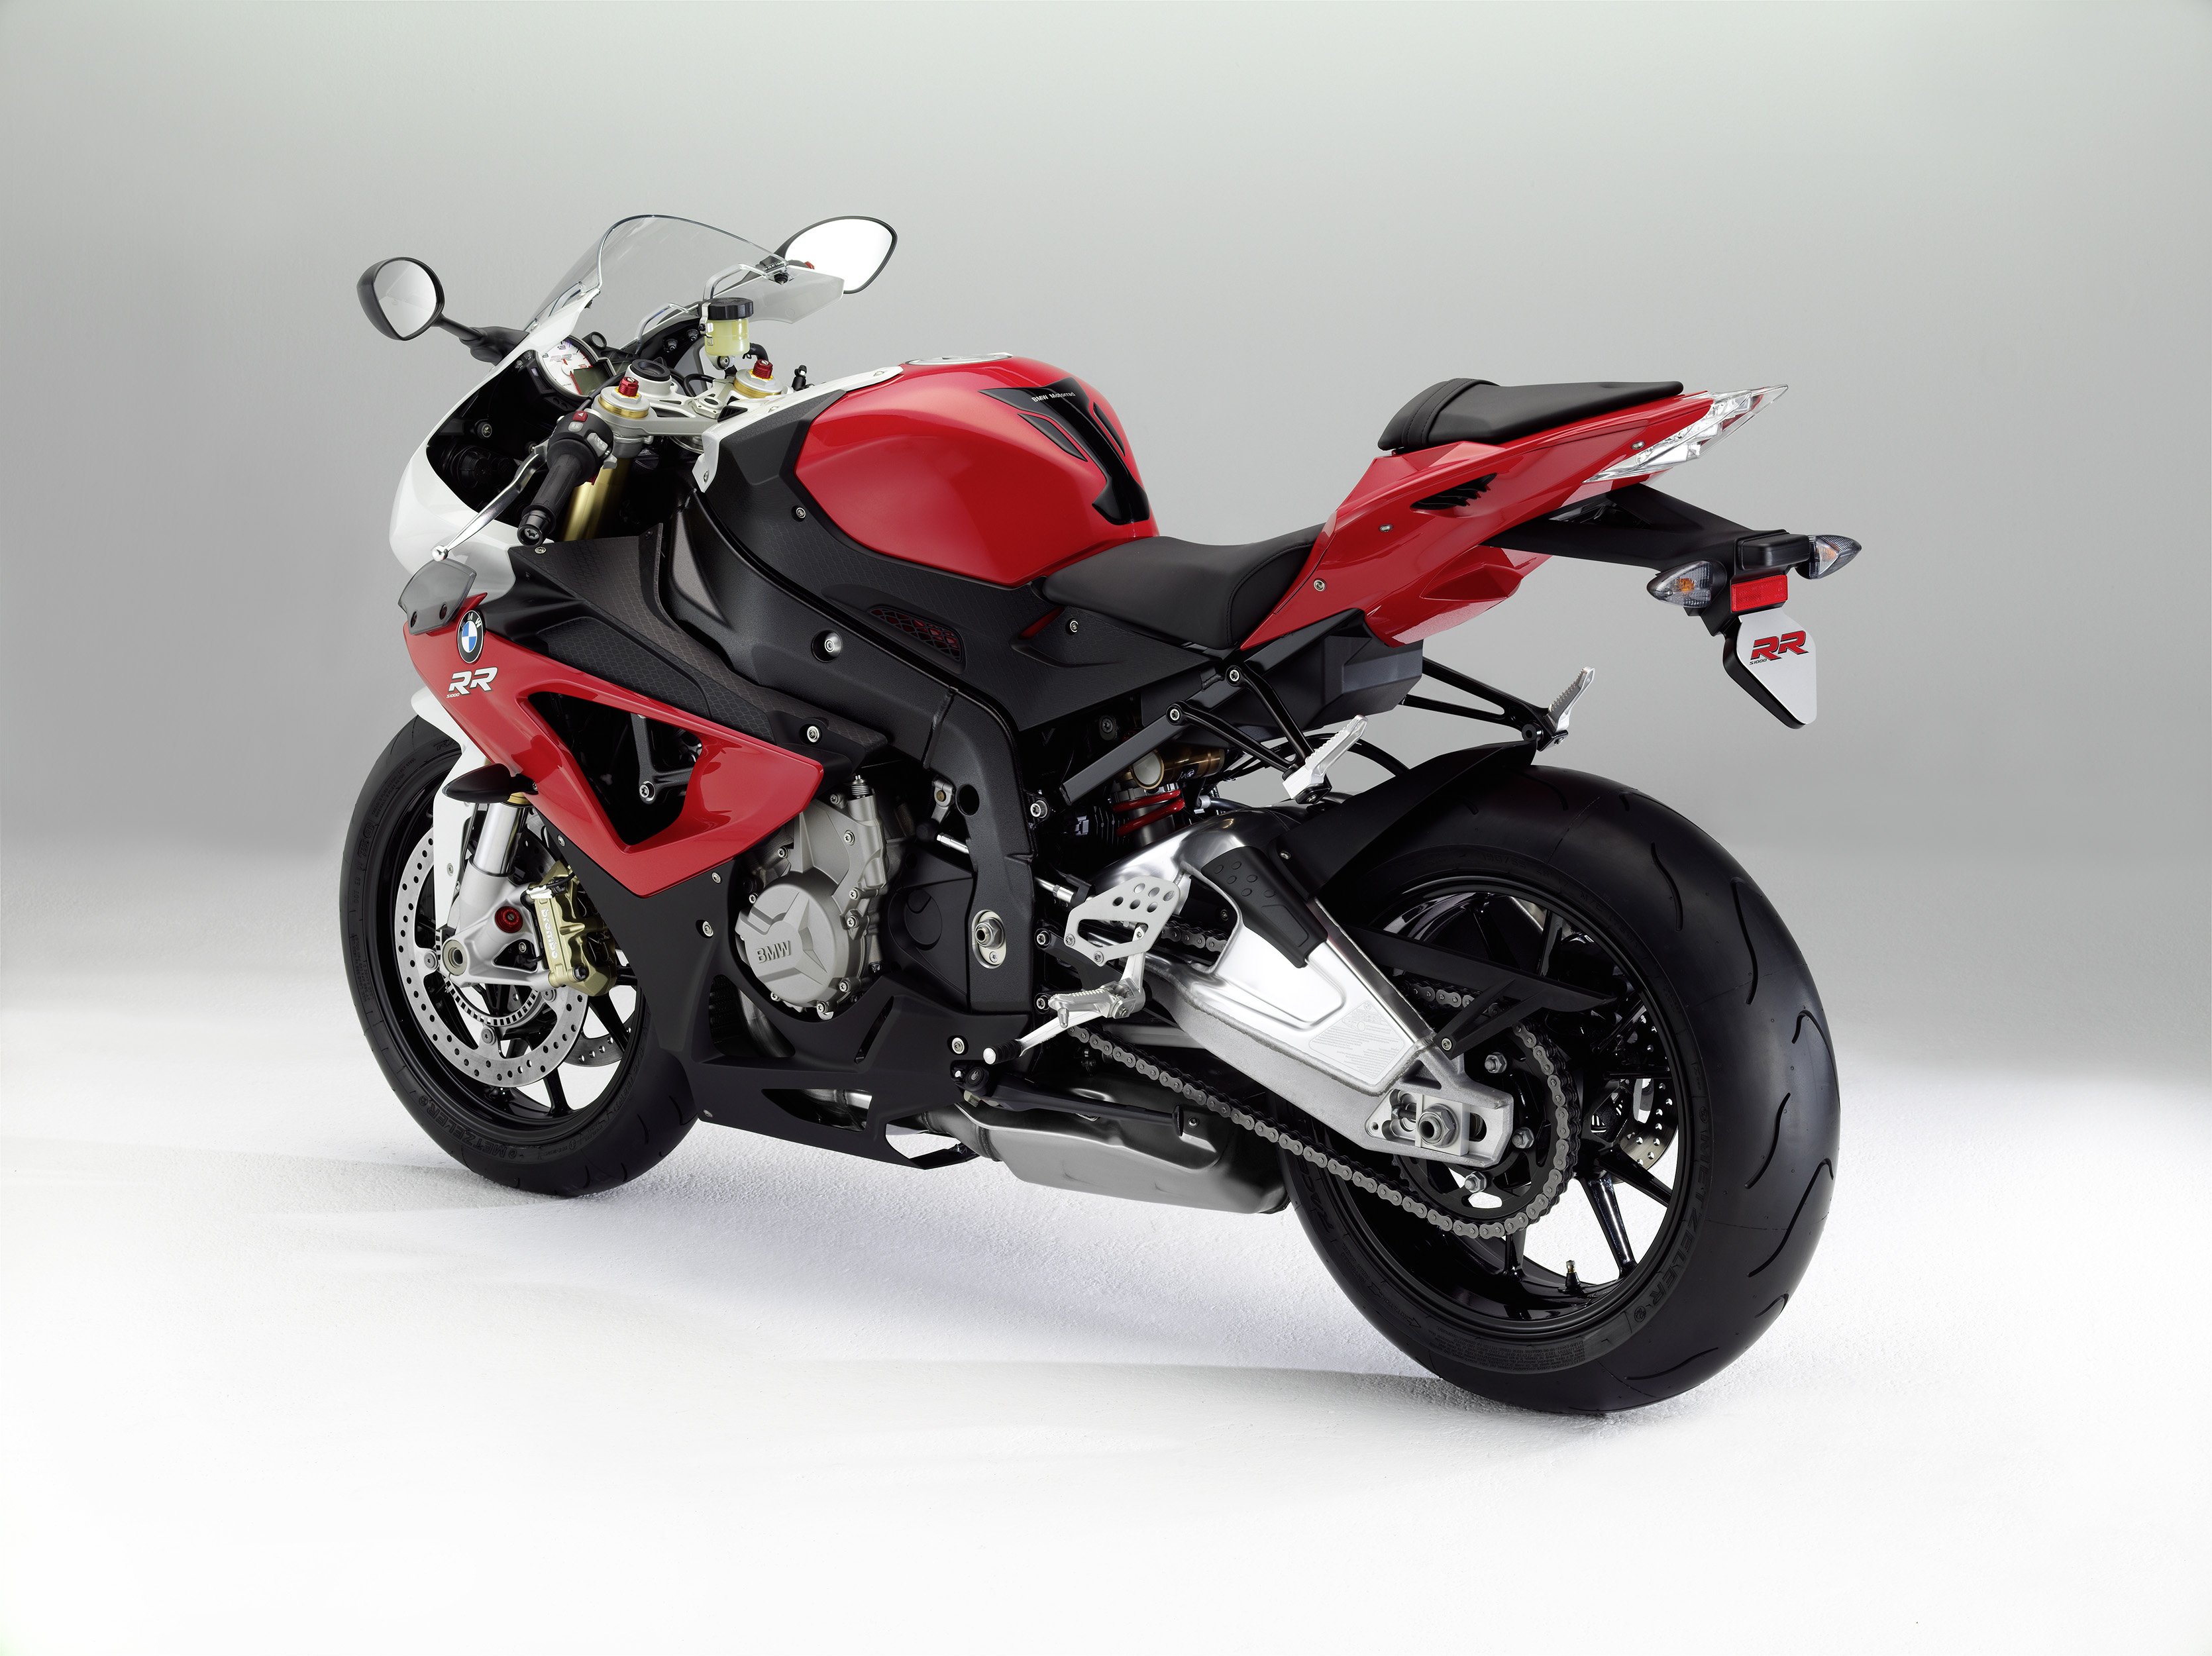 bmw, S 1000 rr, Motorcycles, 2011 Wallpaper